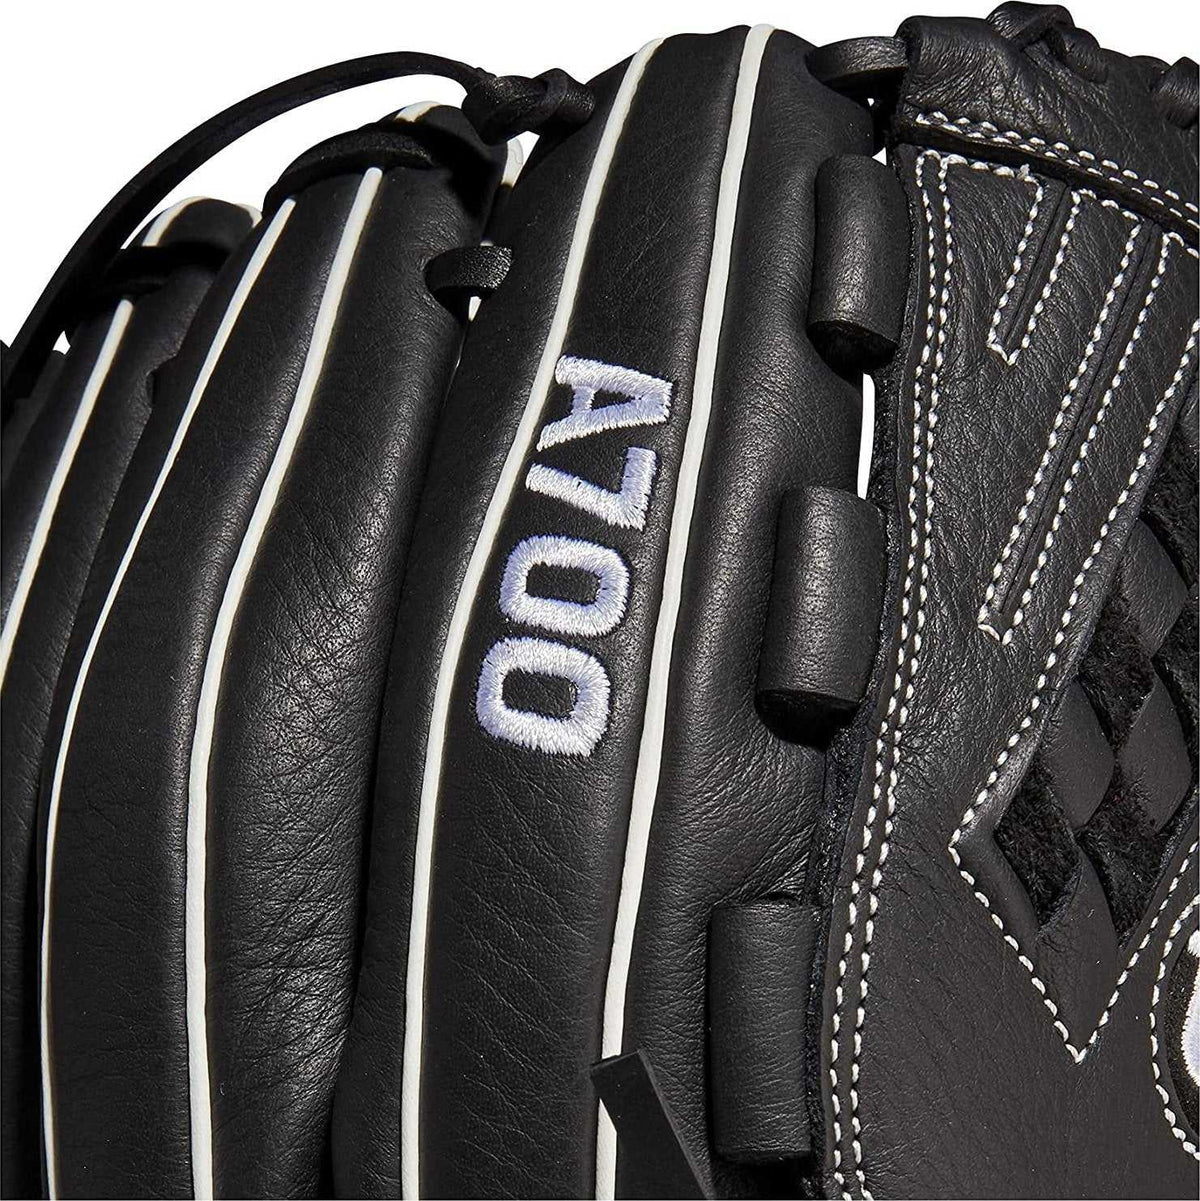 Wilson 2022 A700 12.50&quot; Fastpitch Outfield Glove - Black White - HIT a Double